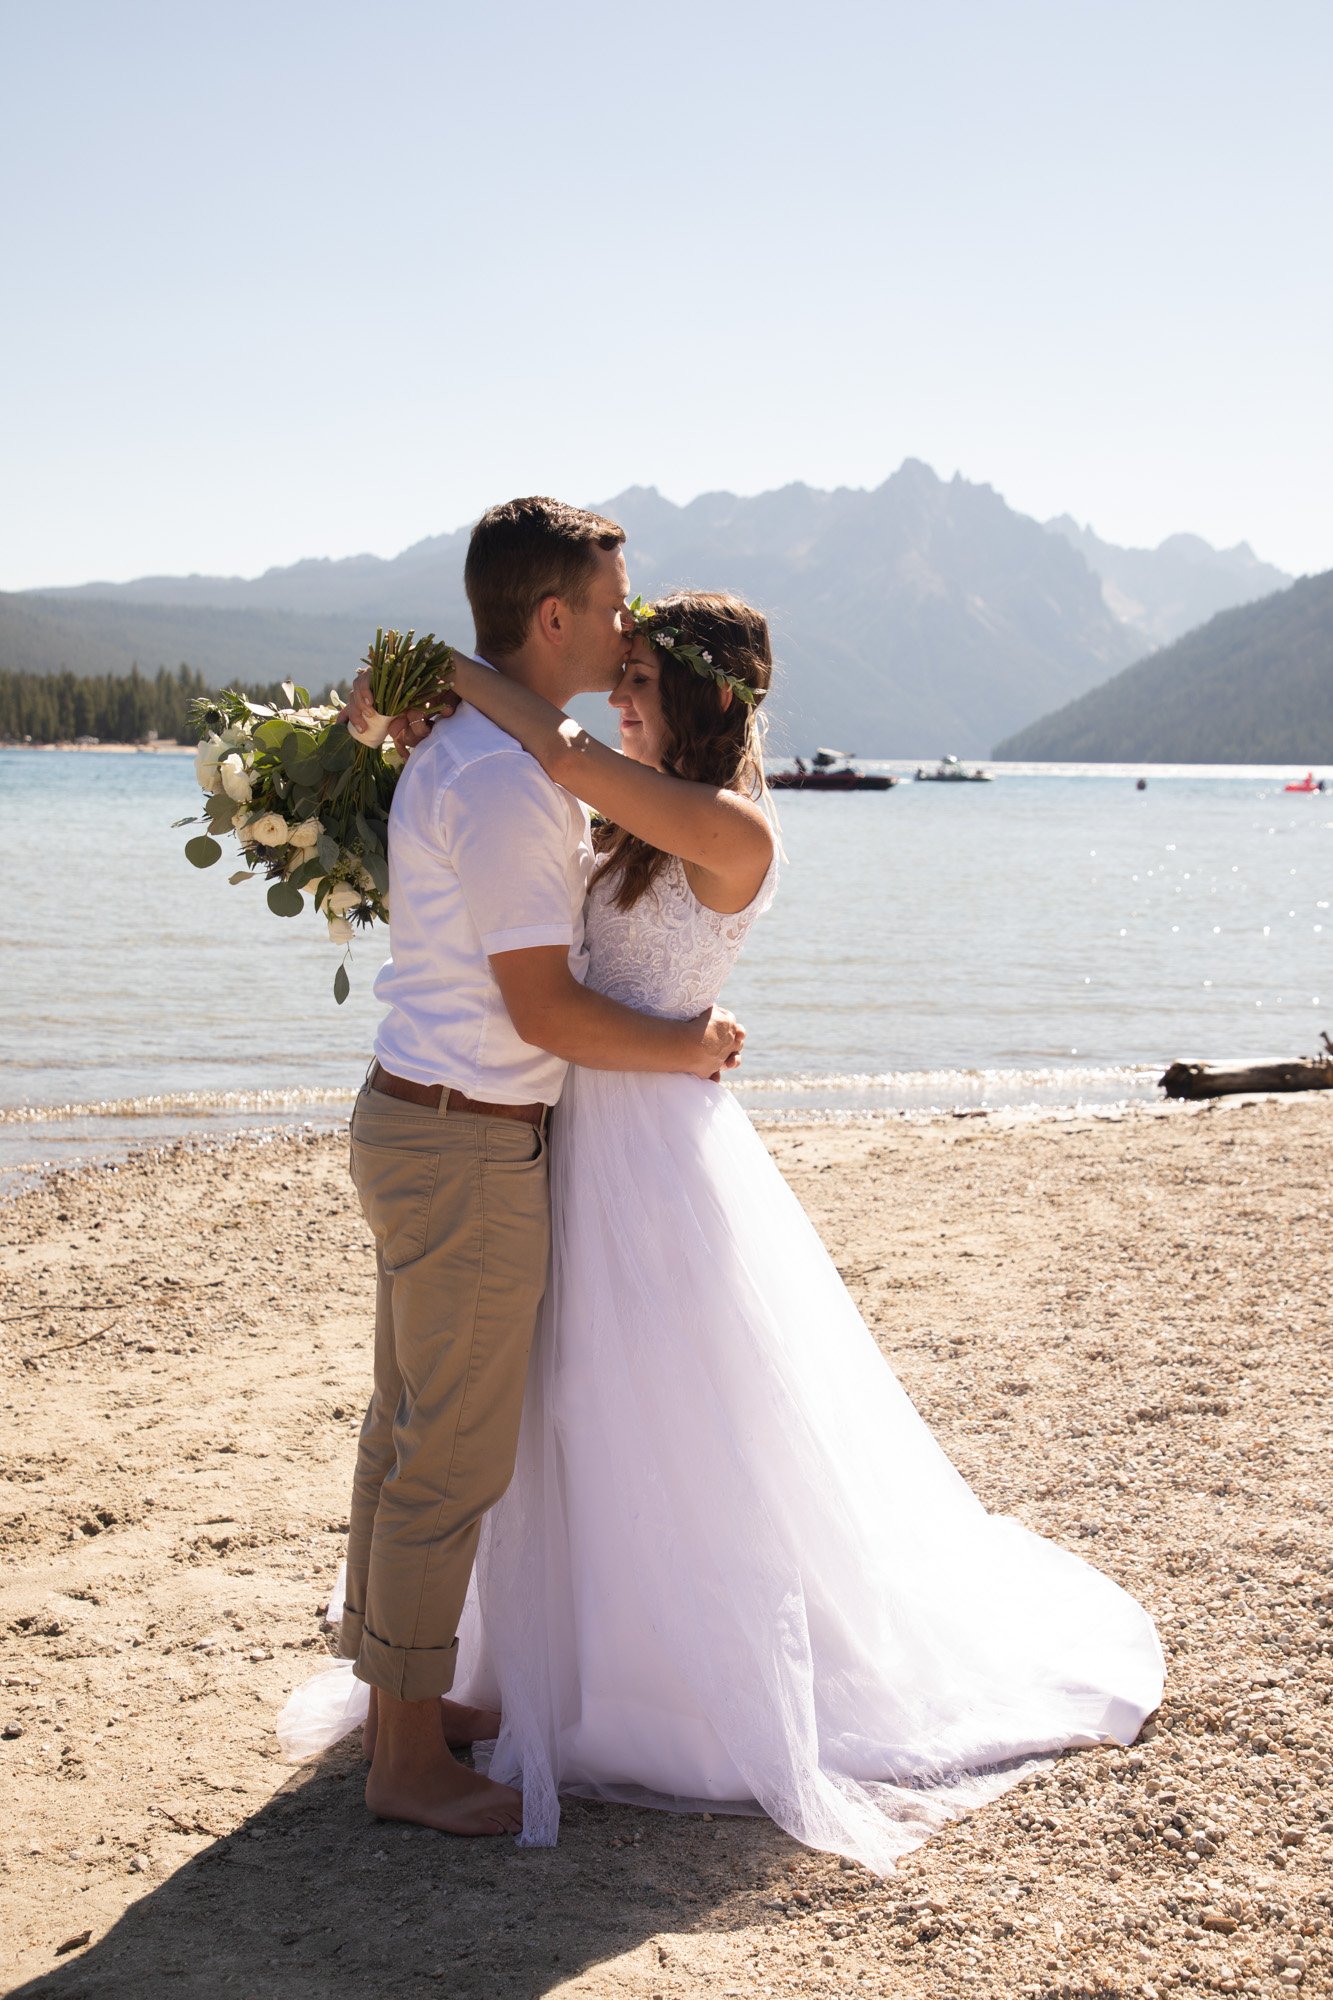 Lakeside summer elopement at Redfish Lake, Stanley, Idaho with photography by Tessa Sheehan